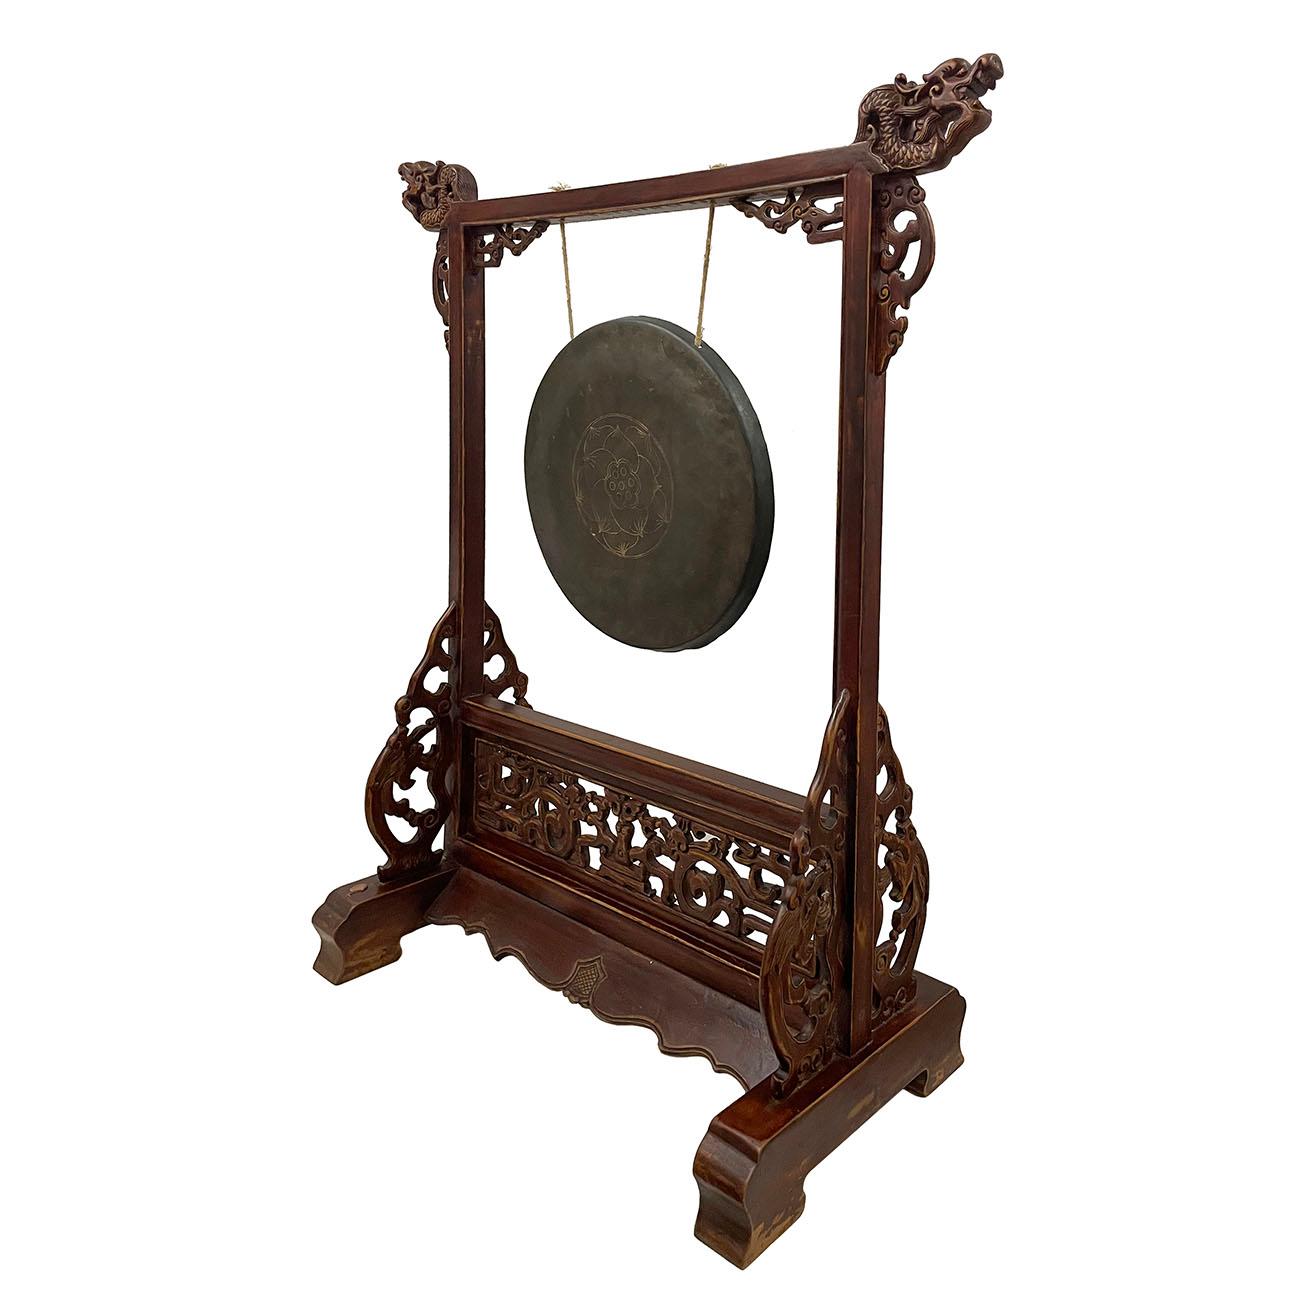 This antique Chinese table gong is hanging on a carved wood stand. It features beautiful carved fretwork on the bottom and detailed carving work of decorated dragons on the top of the wood frame. This antique gong is 100% hand made with the lotus